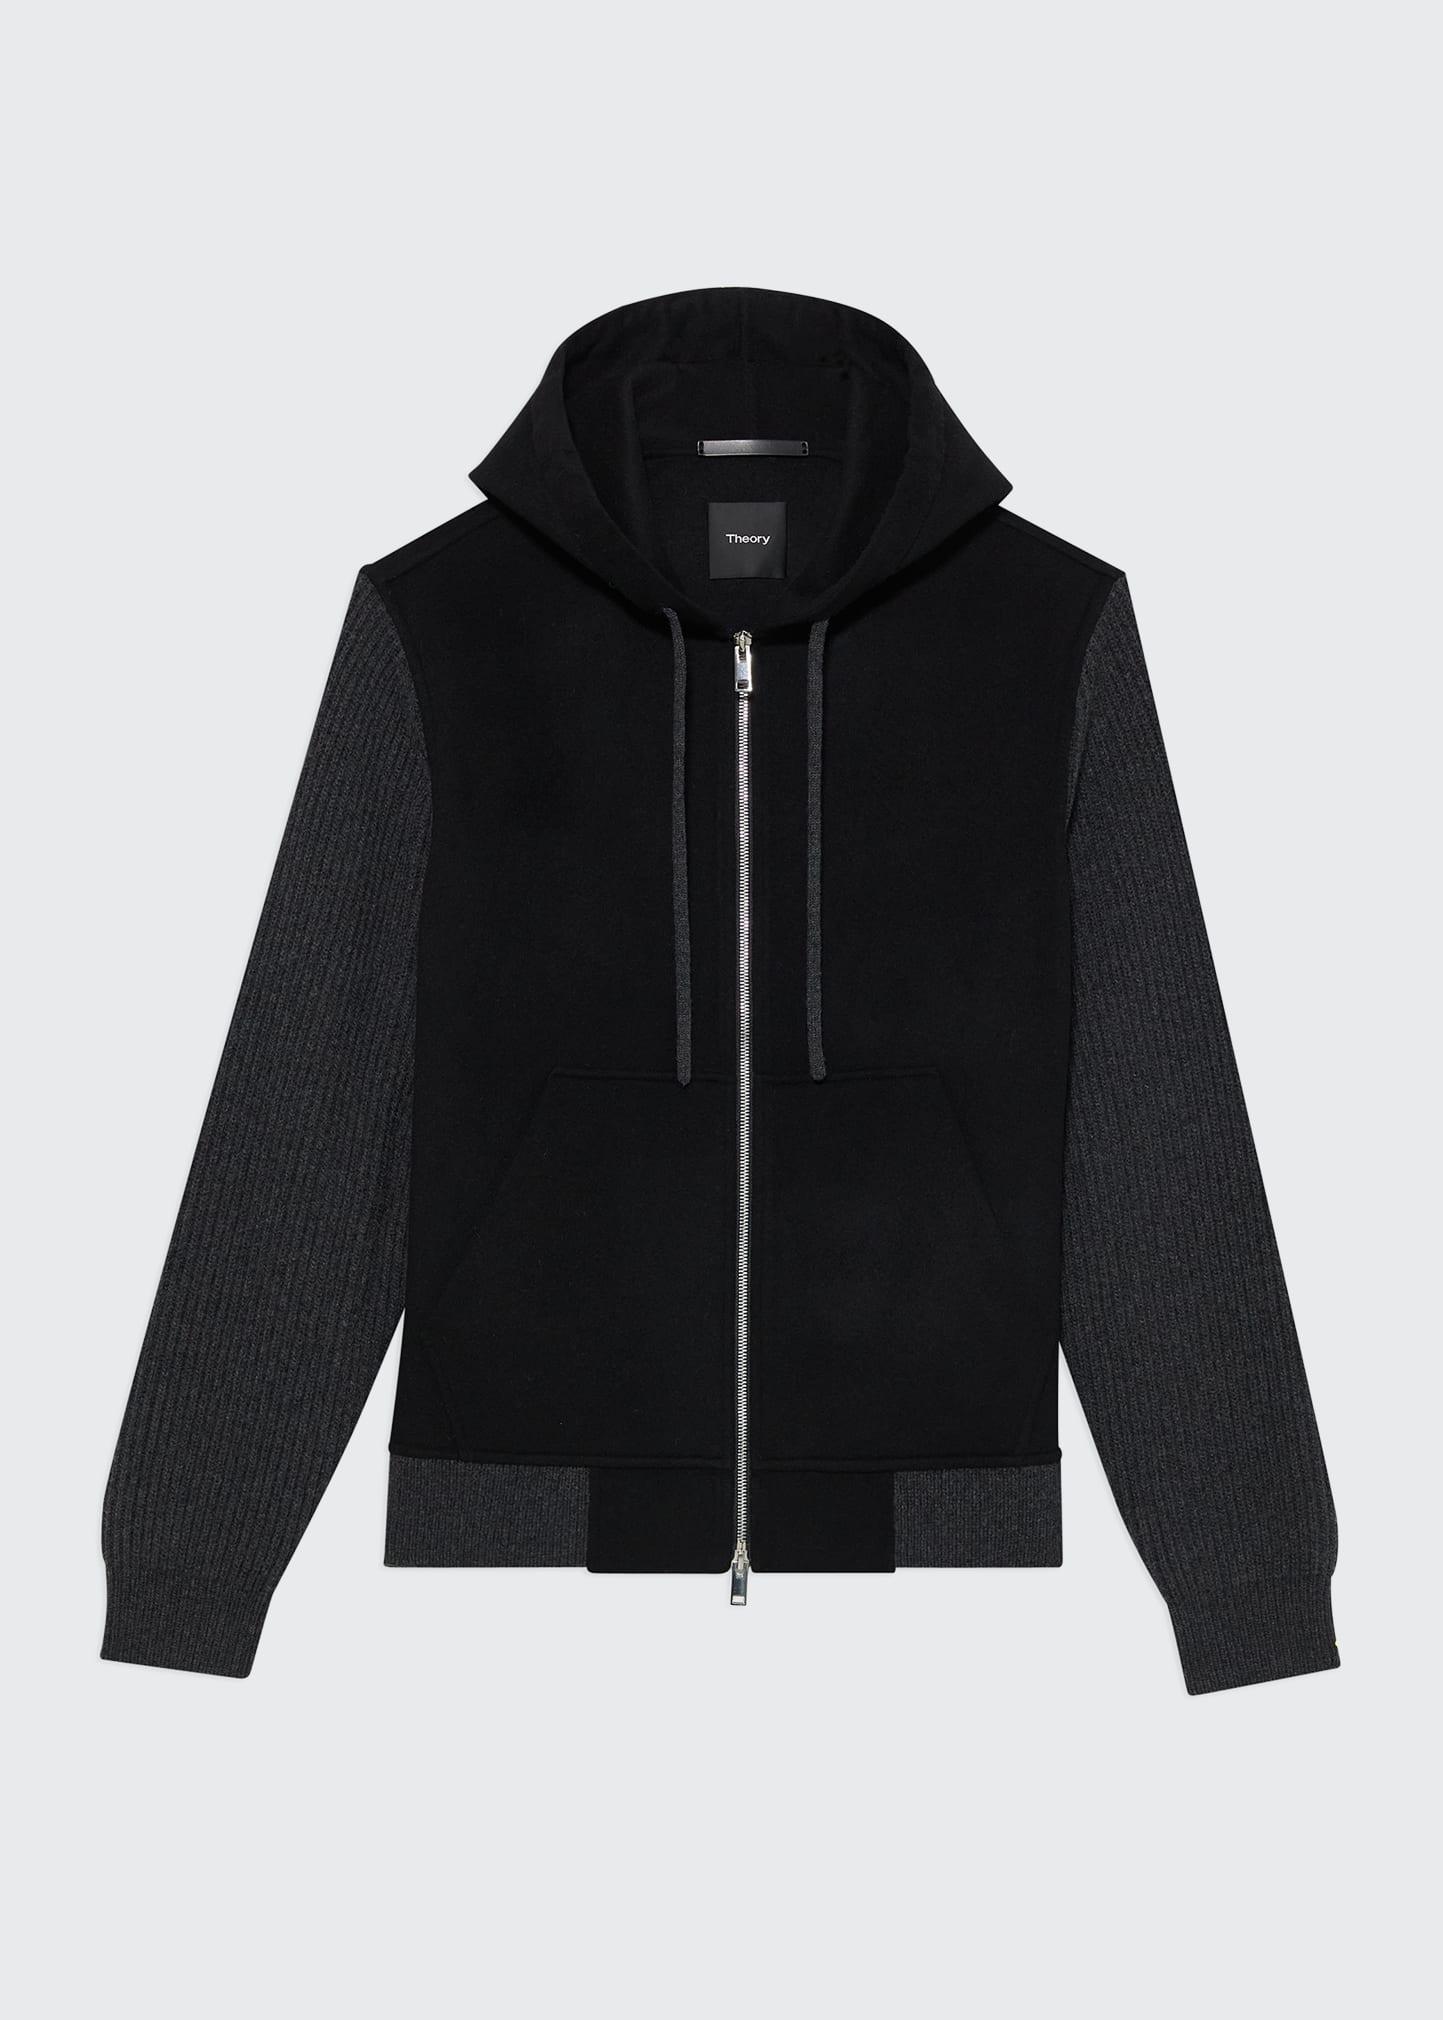 Theory Luxe New Divide Jacket in Black for Men | Lyst